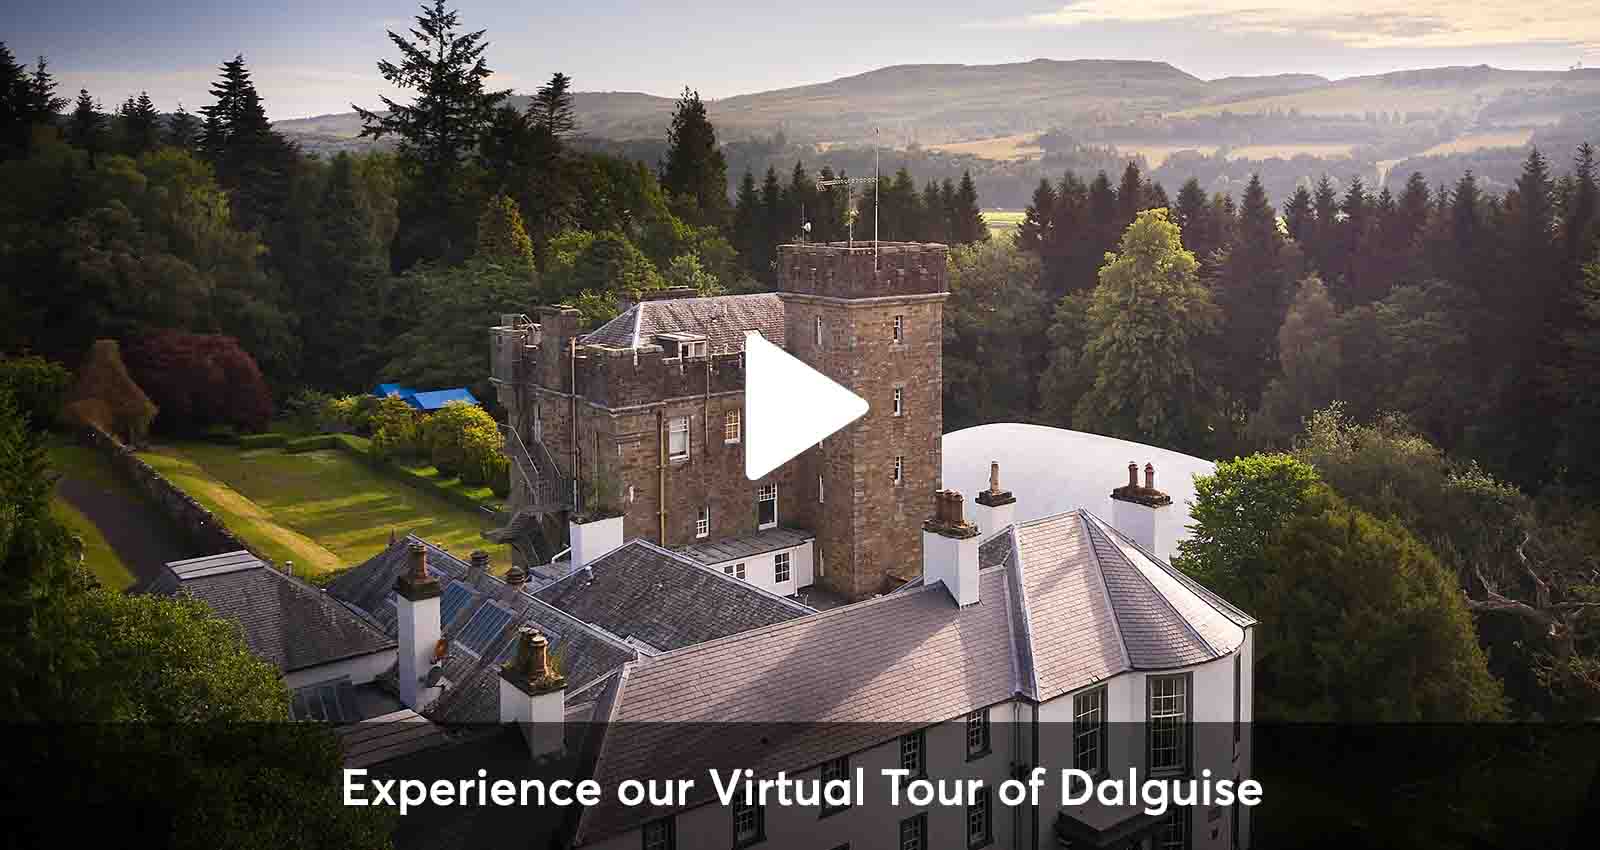 Primary School Trips to Dalguise